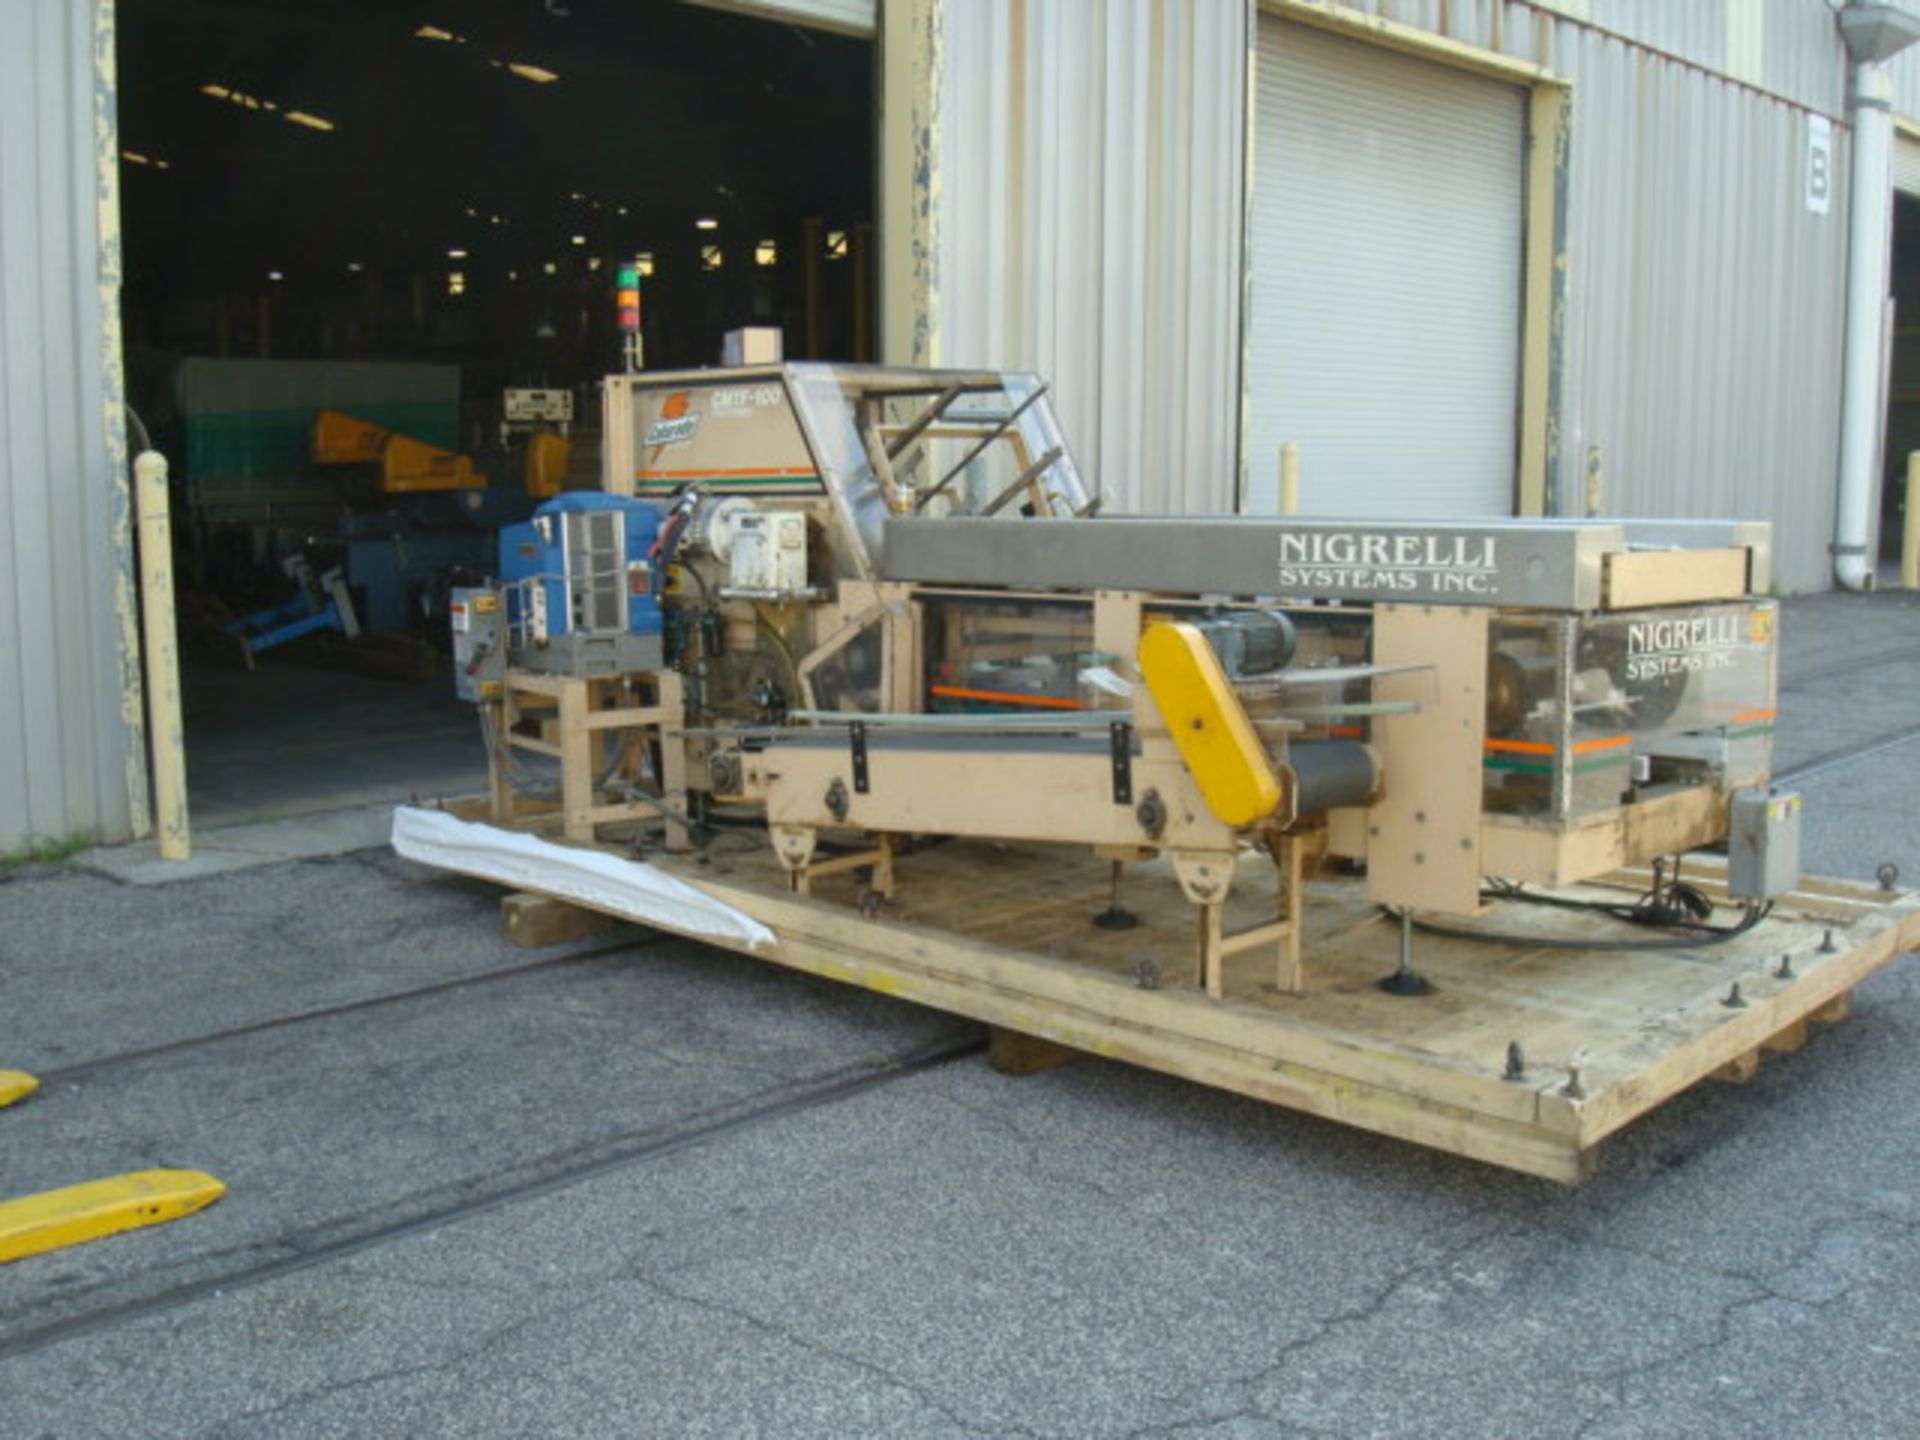 NIGRELLI High-Speed Tray Former with Nordson ProBlue 10 Hot Melt Glue; Model CMTF-100 (Located